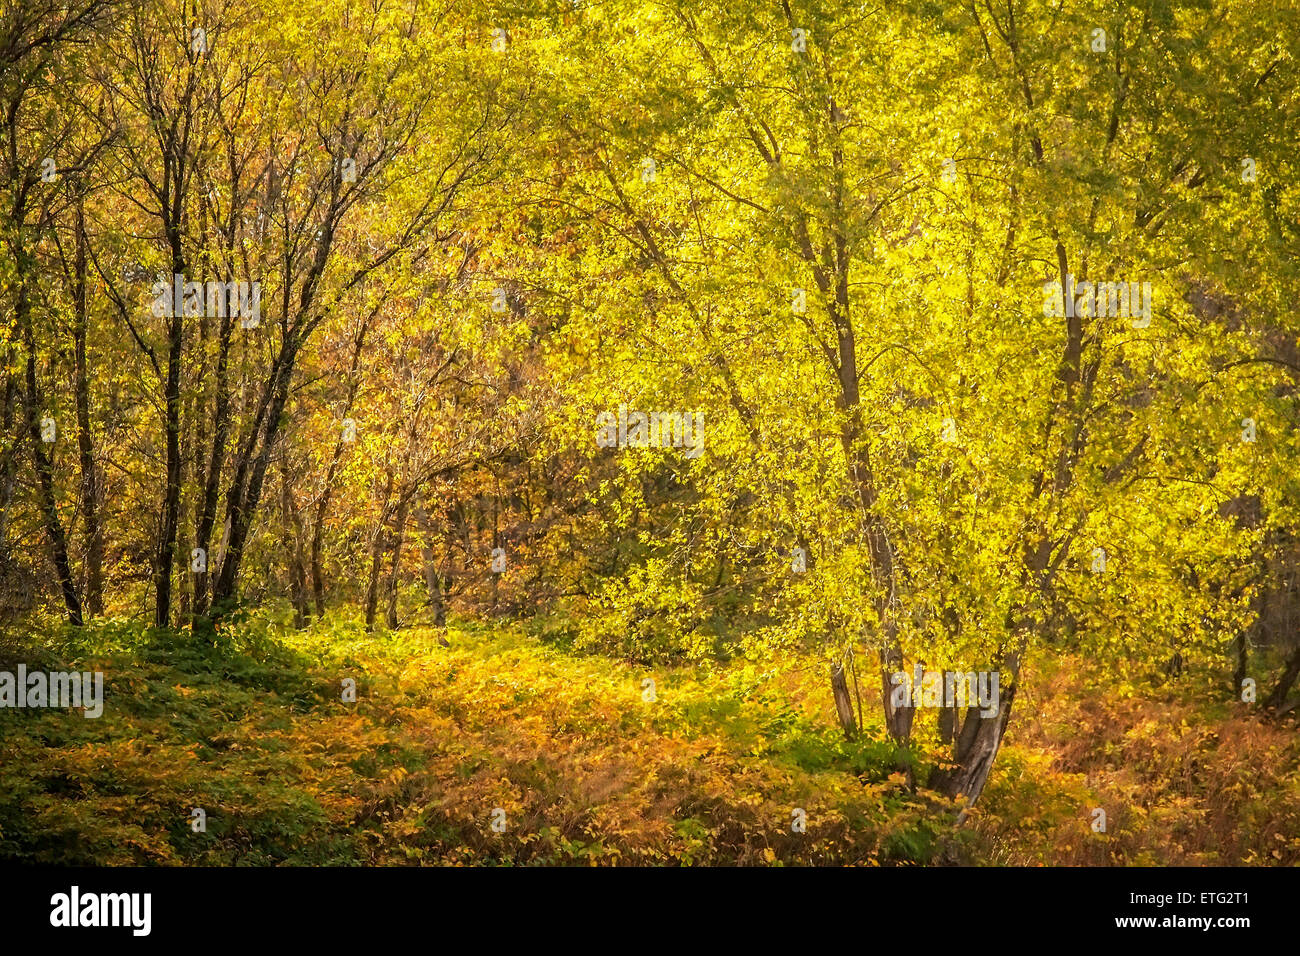 Late afternoon sunshine filters through colorful trees and ground foliage in a Renoire-like pastoral forest scene. Stock Photo